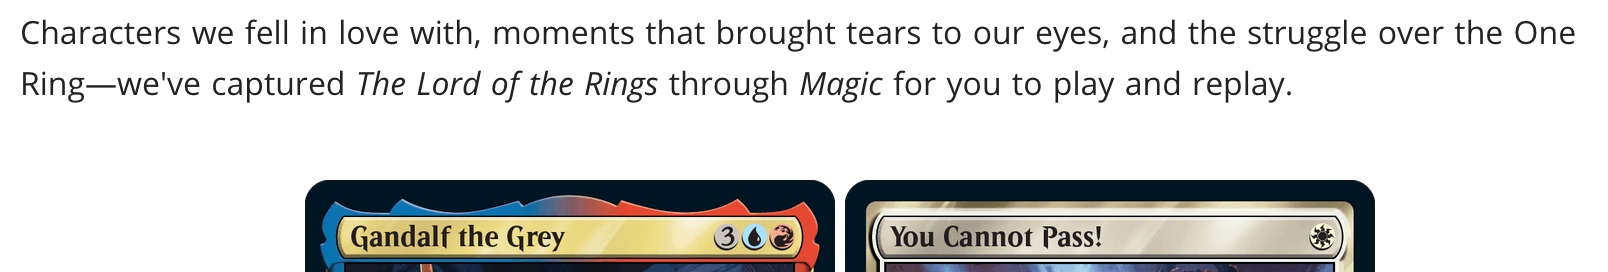 "Characters we fell in love with, moments that brought tears to our eyes, and the struggle of the One Ring – we've captured The Lord of the Rings through Magic for you to play and replay."